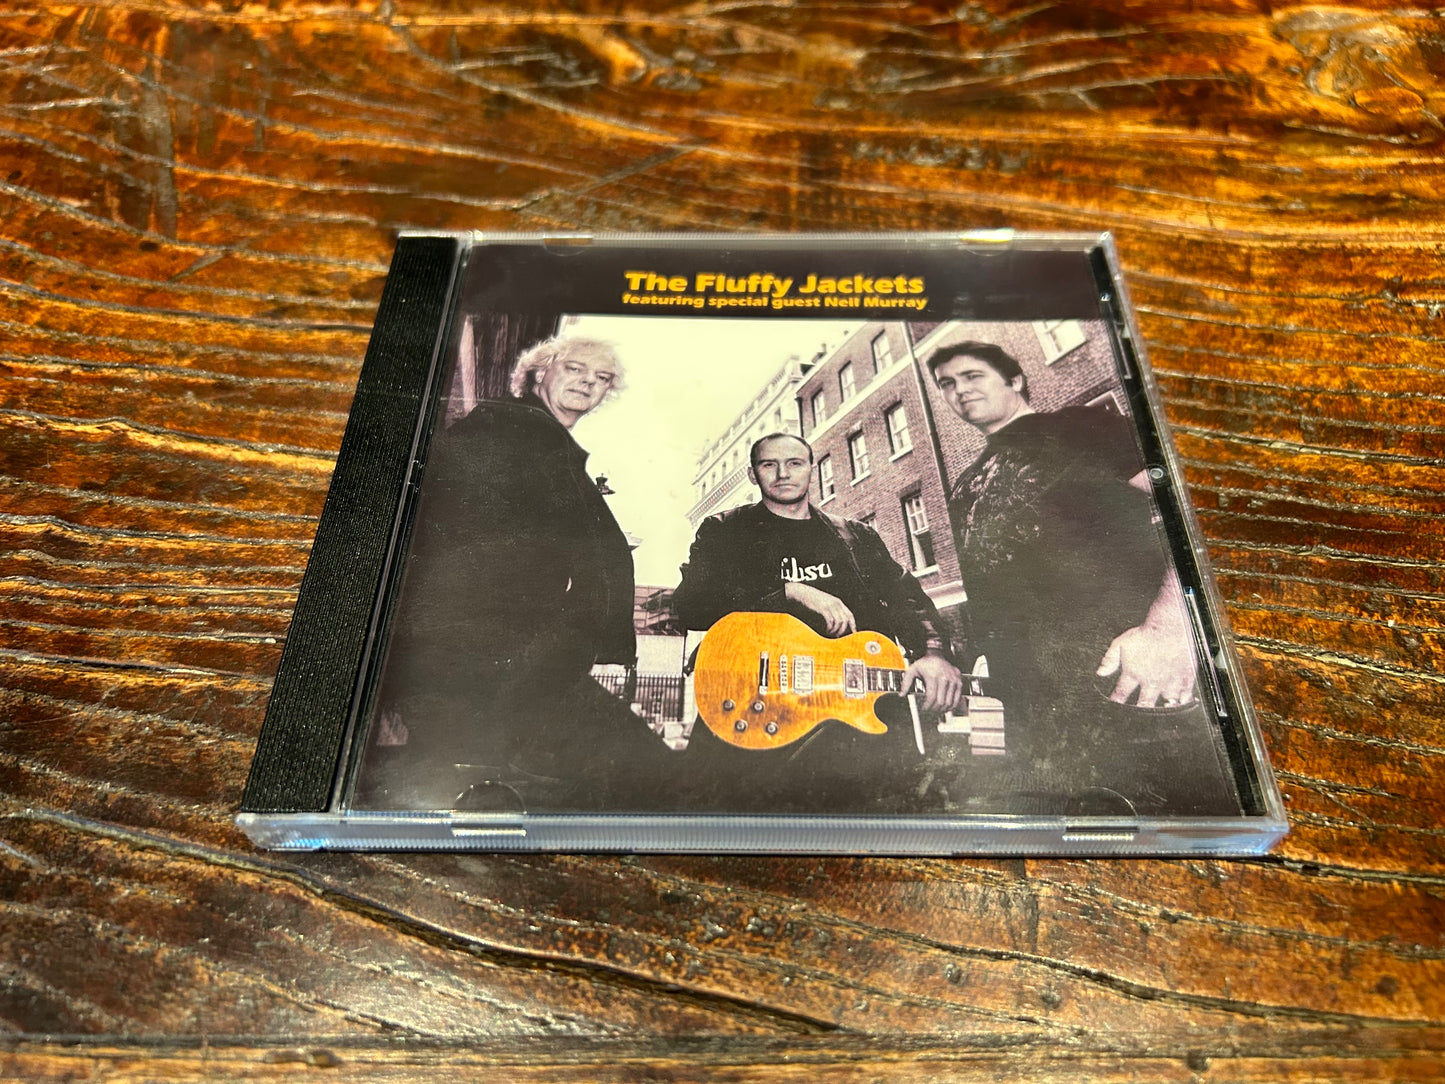 The Fluffy Jackets Featuring Special Guest Neil Murray (3-Track CD) (2007)